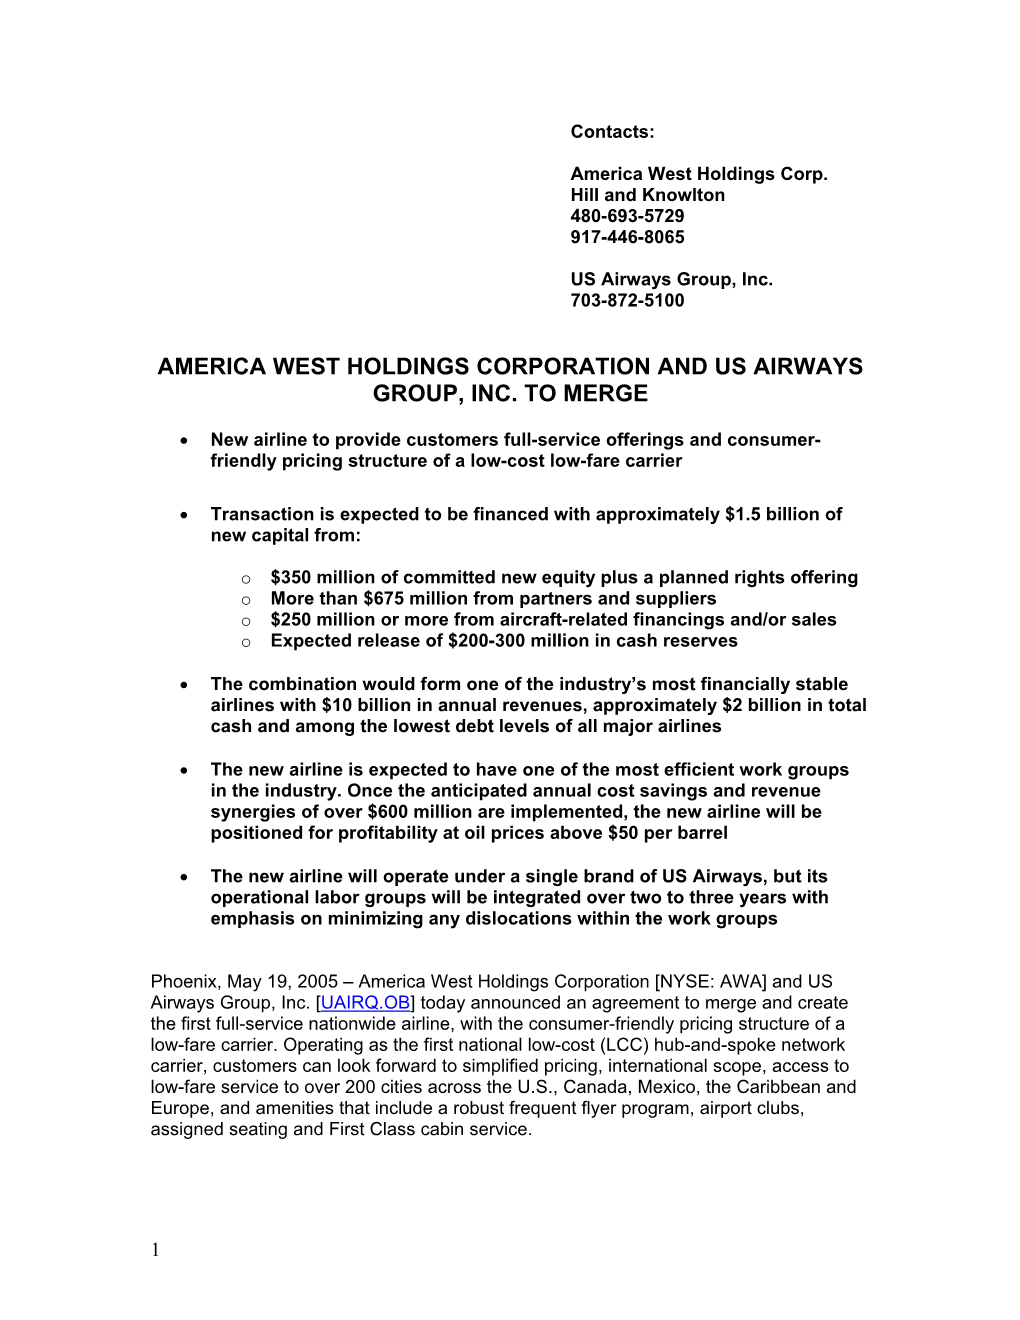 America West Holdings Corporation and Us Airways Group, Inc